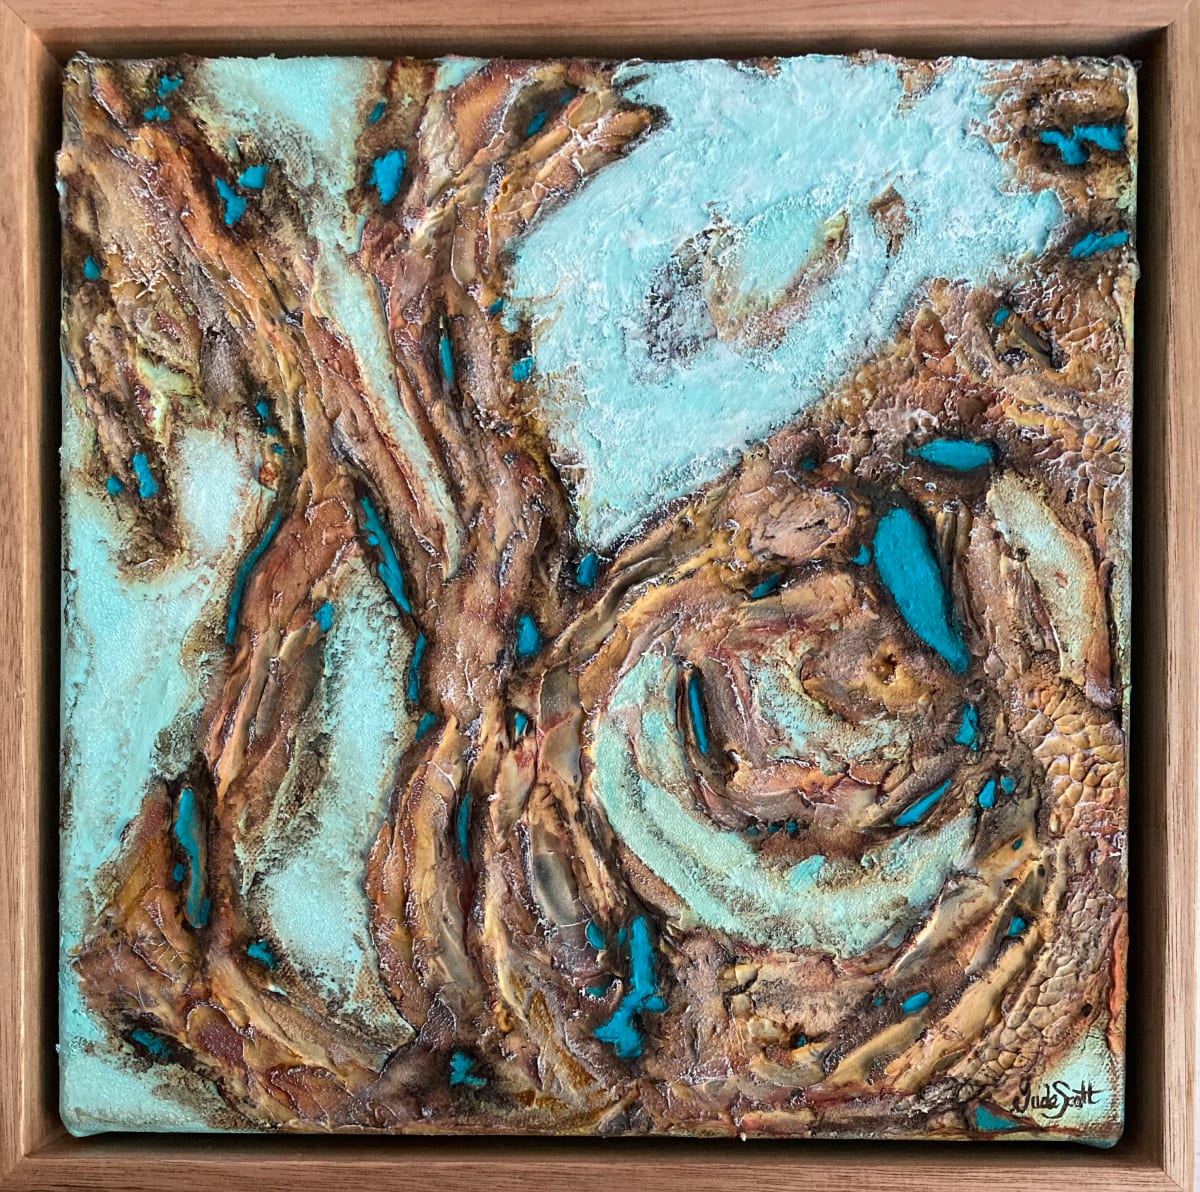 Rock Shelf by Jude Scott  Image: Abstract interpretation of a rock shelf from an aerial perspective including rock pools, white wash and aqua waters.